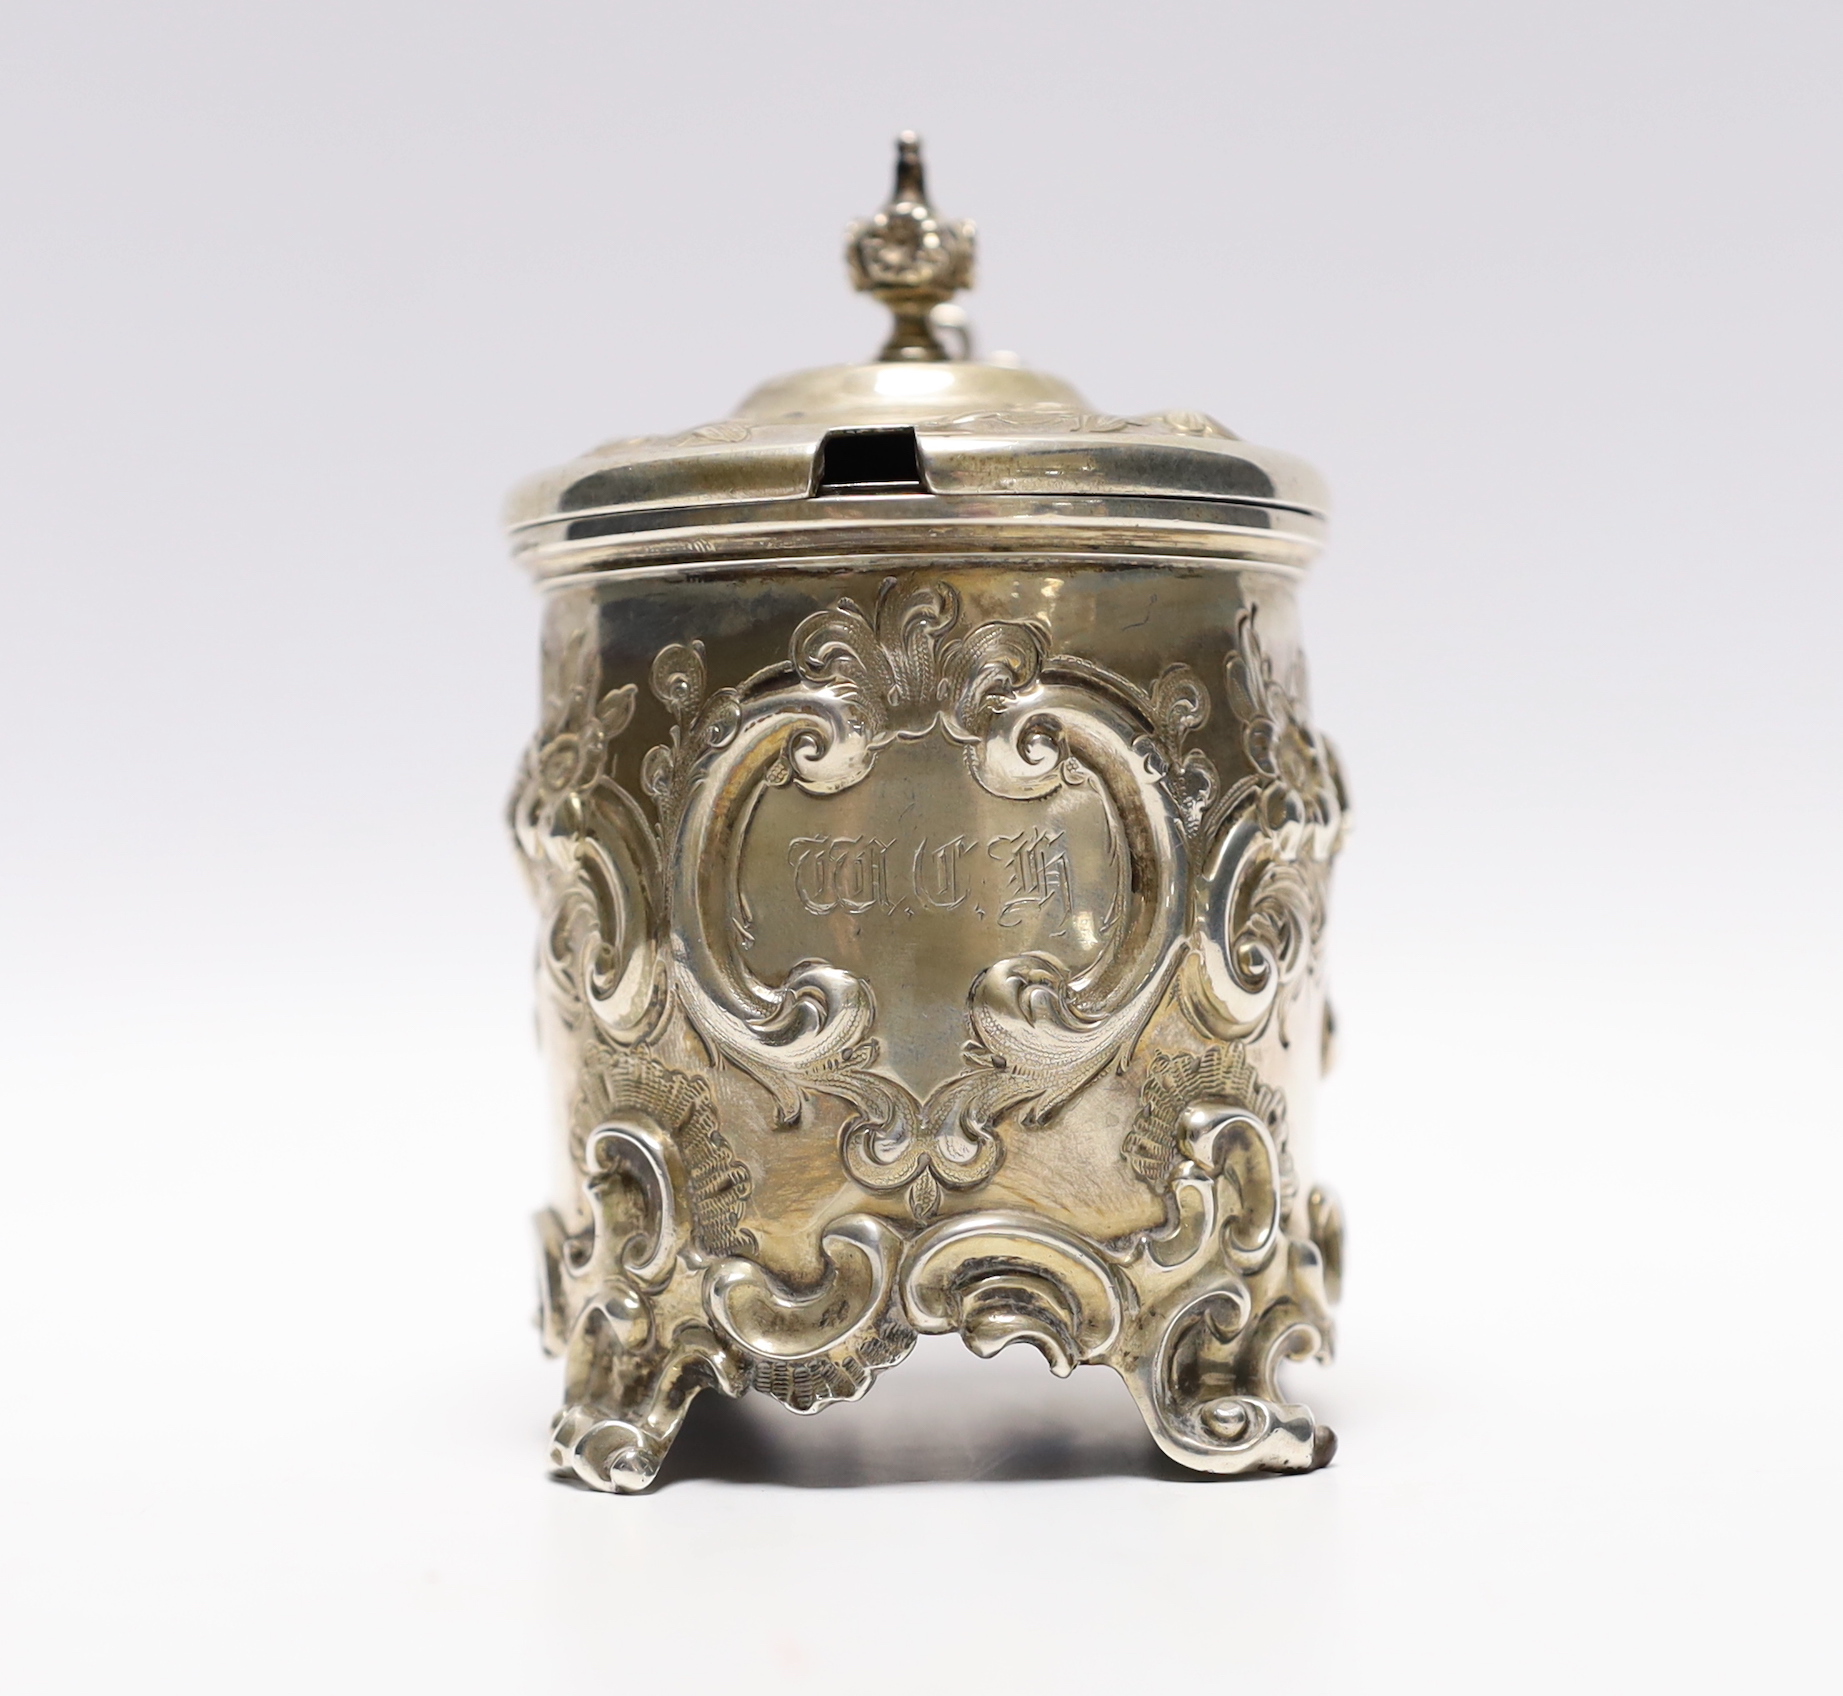 A Victorian embossed silver drum mustard, John Evans II, London, 1863, decorated with foliage and scrolls.